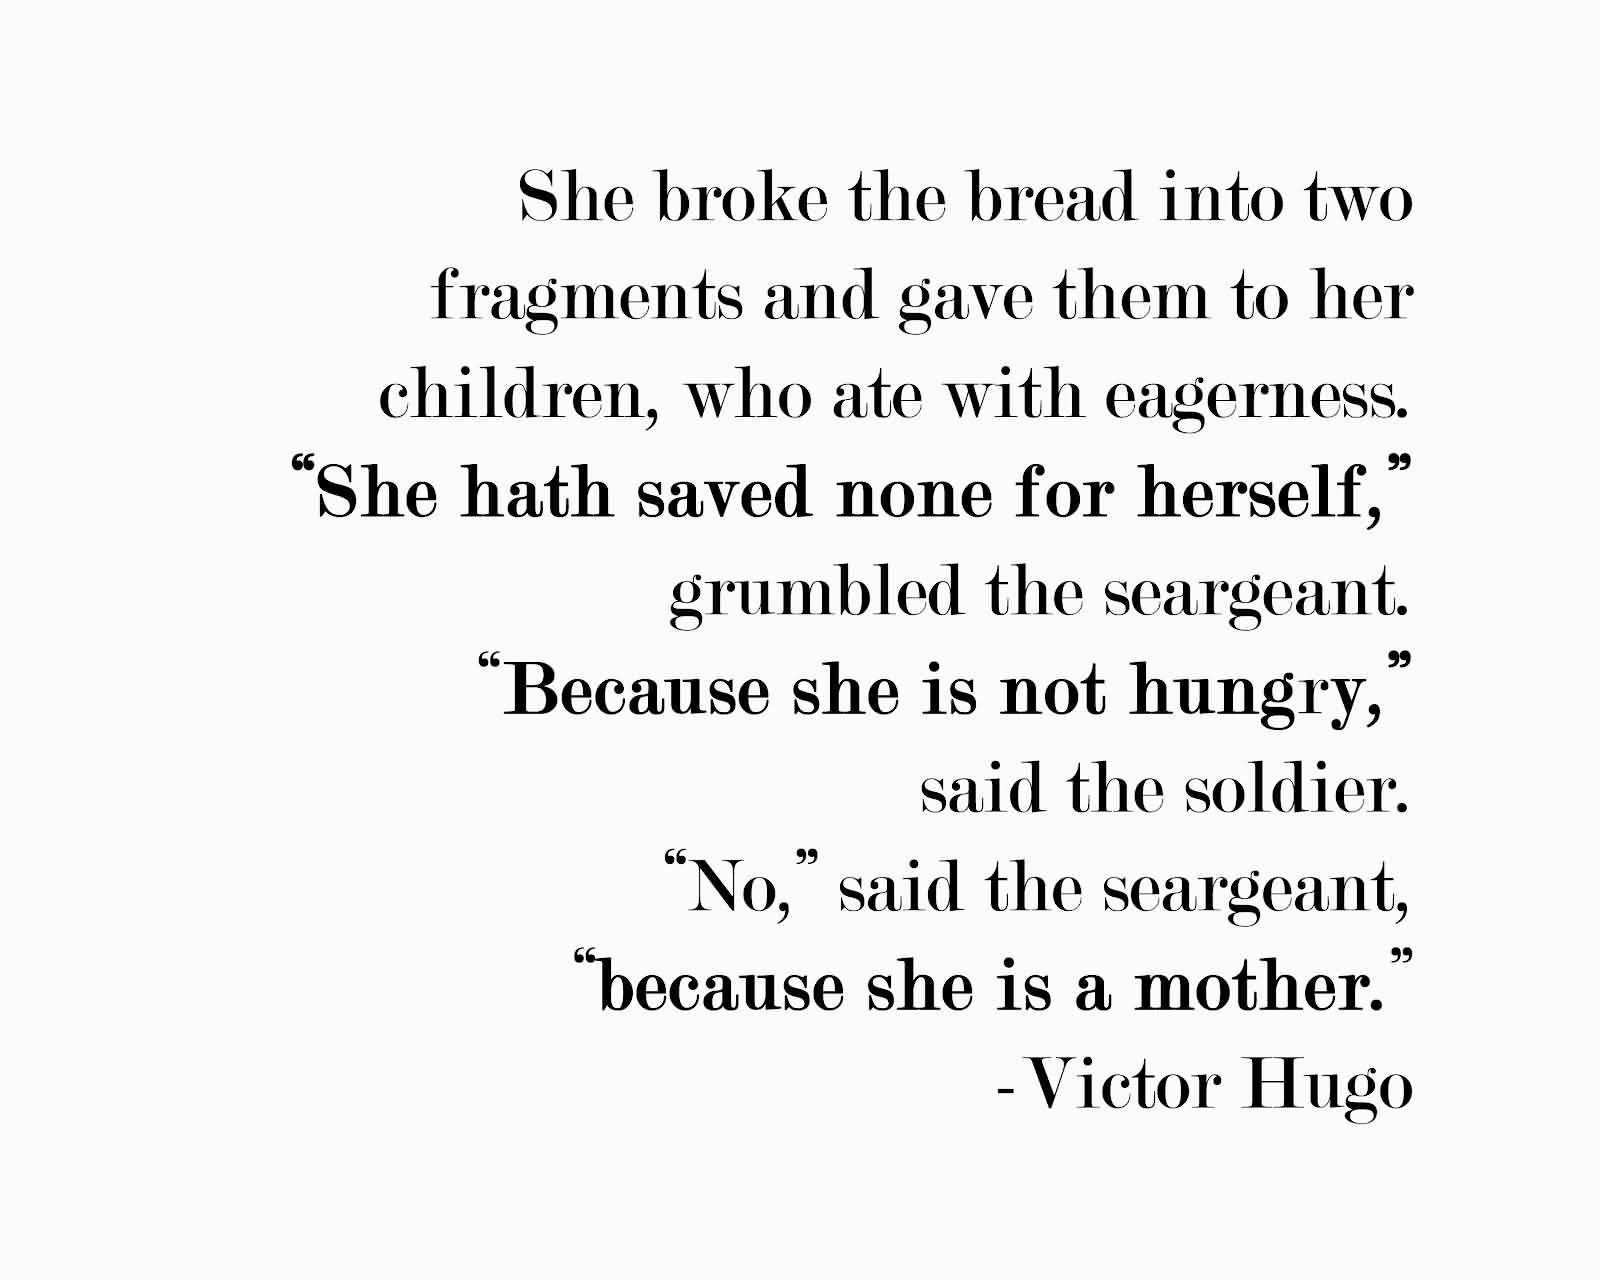 She broke the bread into two fragments and gave them to her children, who ate with eagerness. 'She hath saved none for herself,' grumbled the seargeant.... Victor Hugo